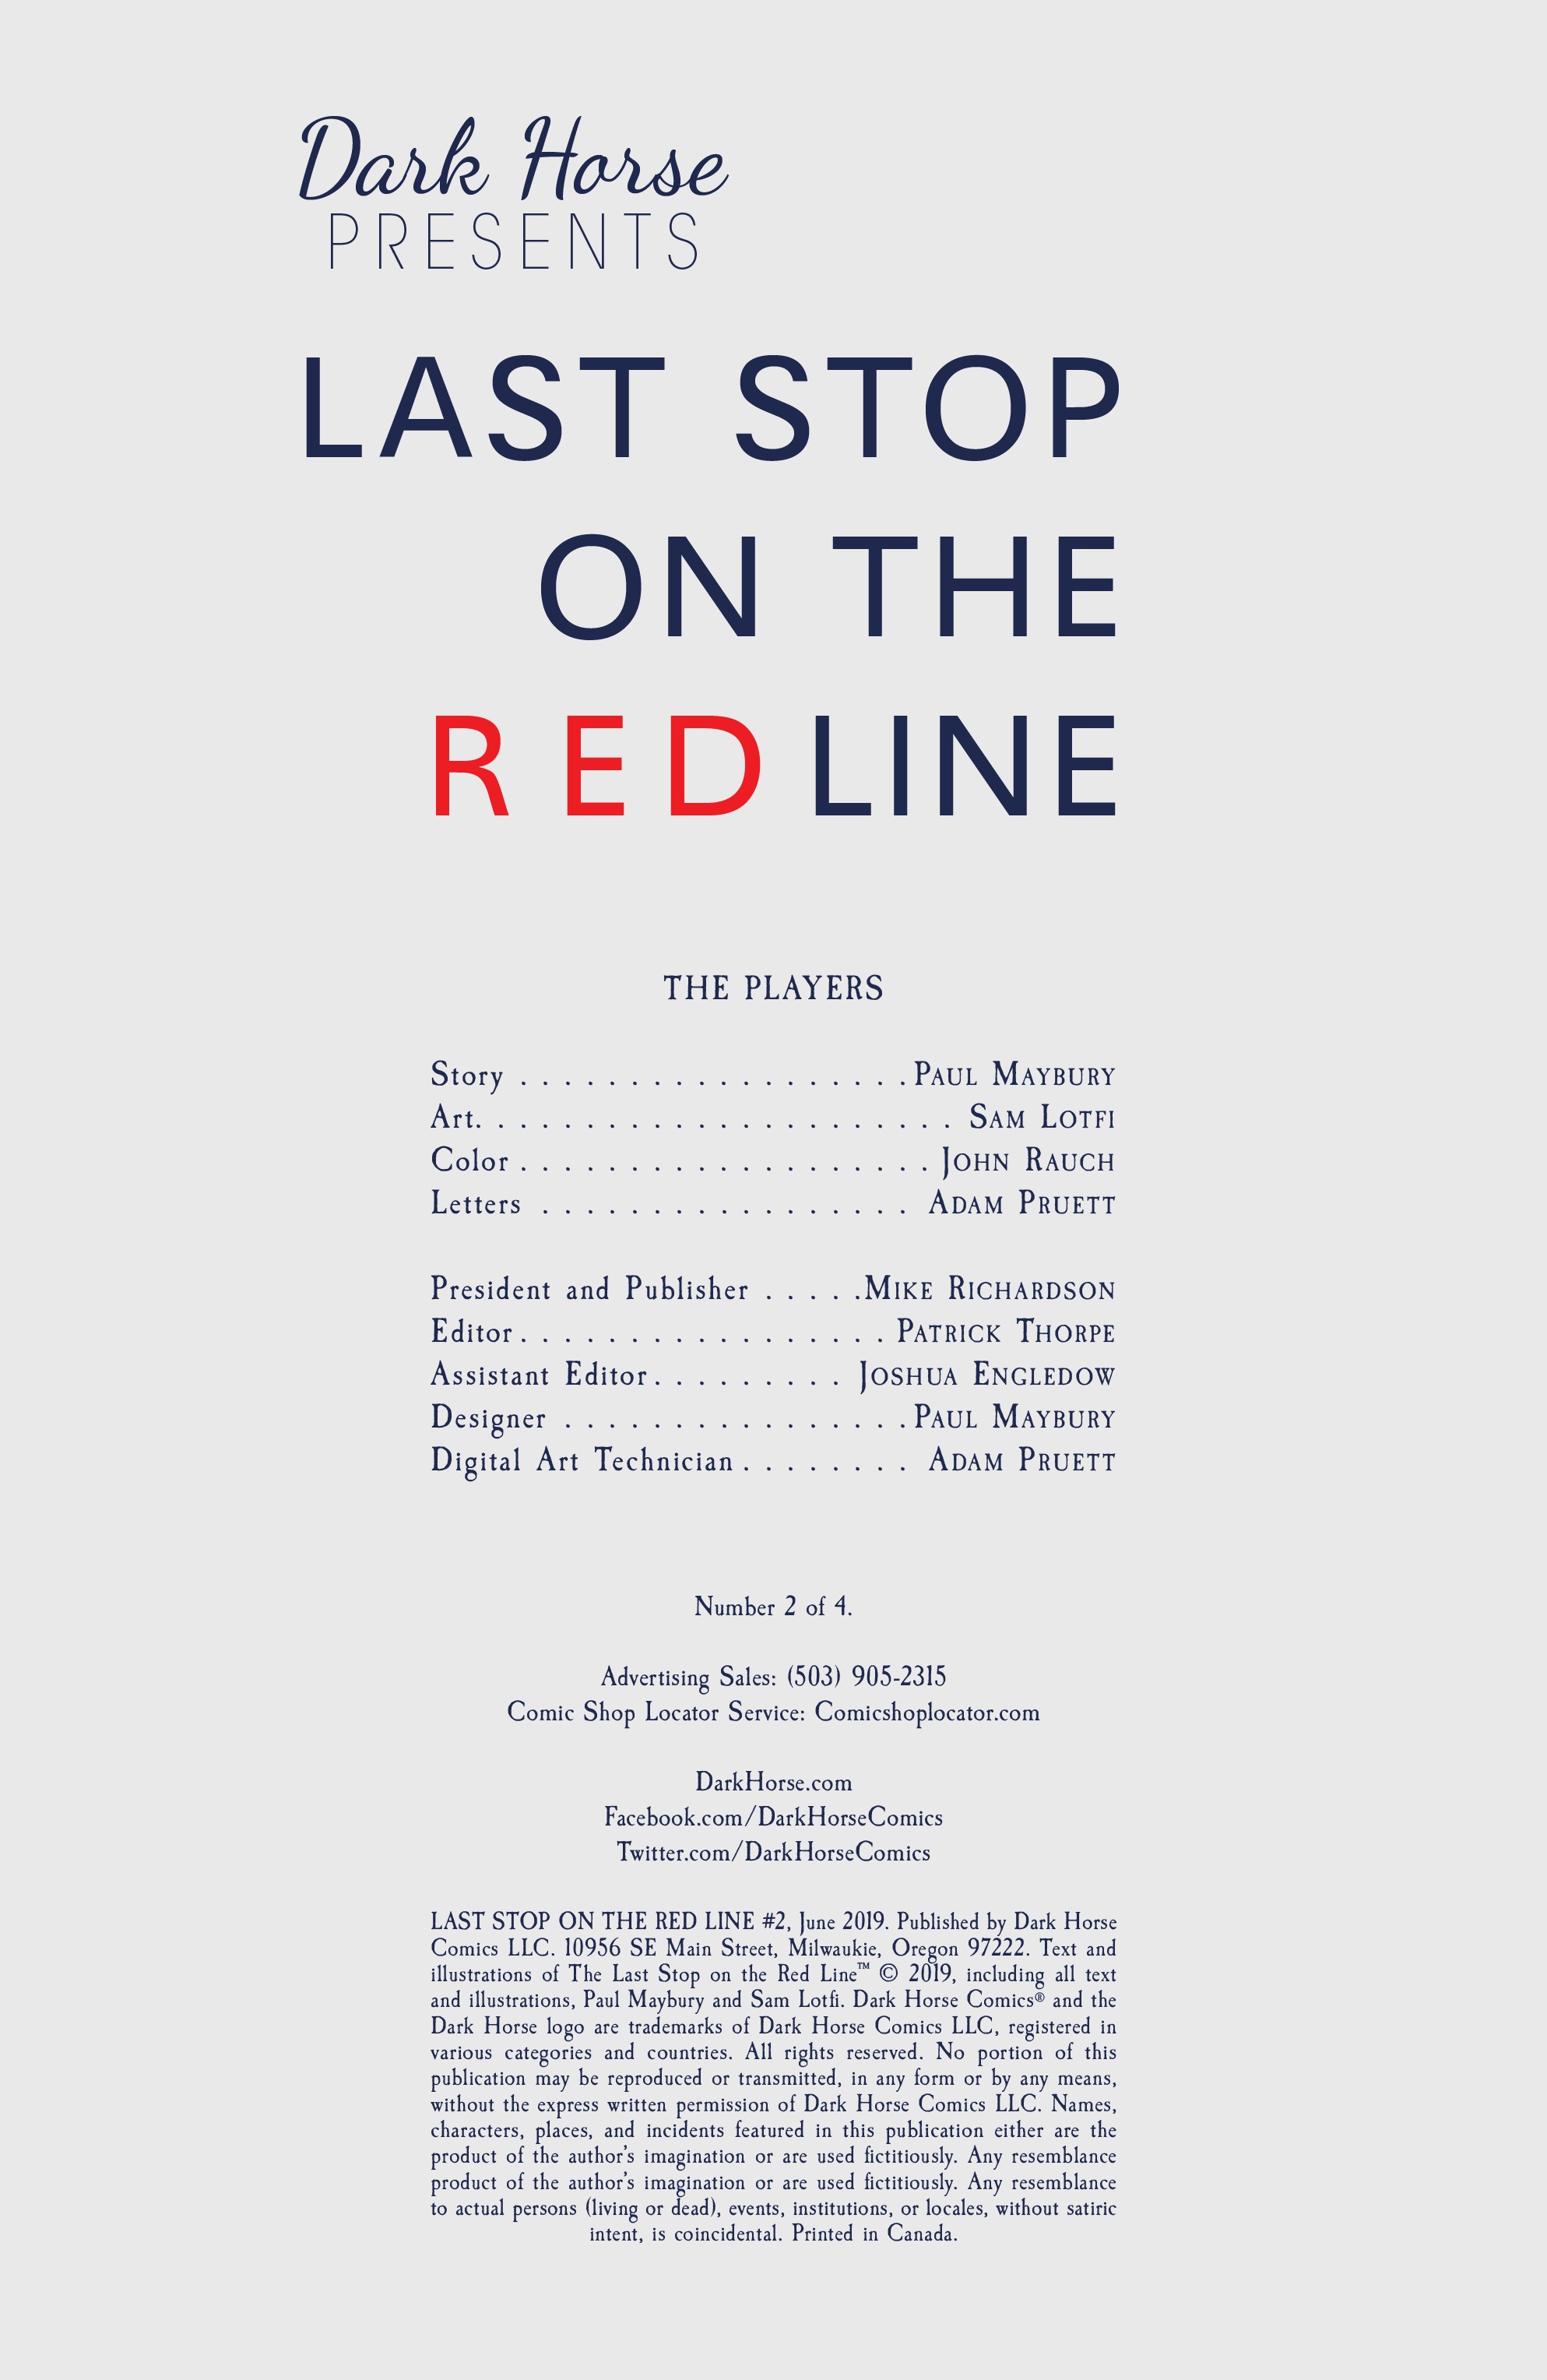 Read online Last Stop On the Red Line comic -  Issue #2 - 2